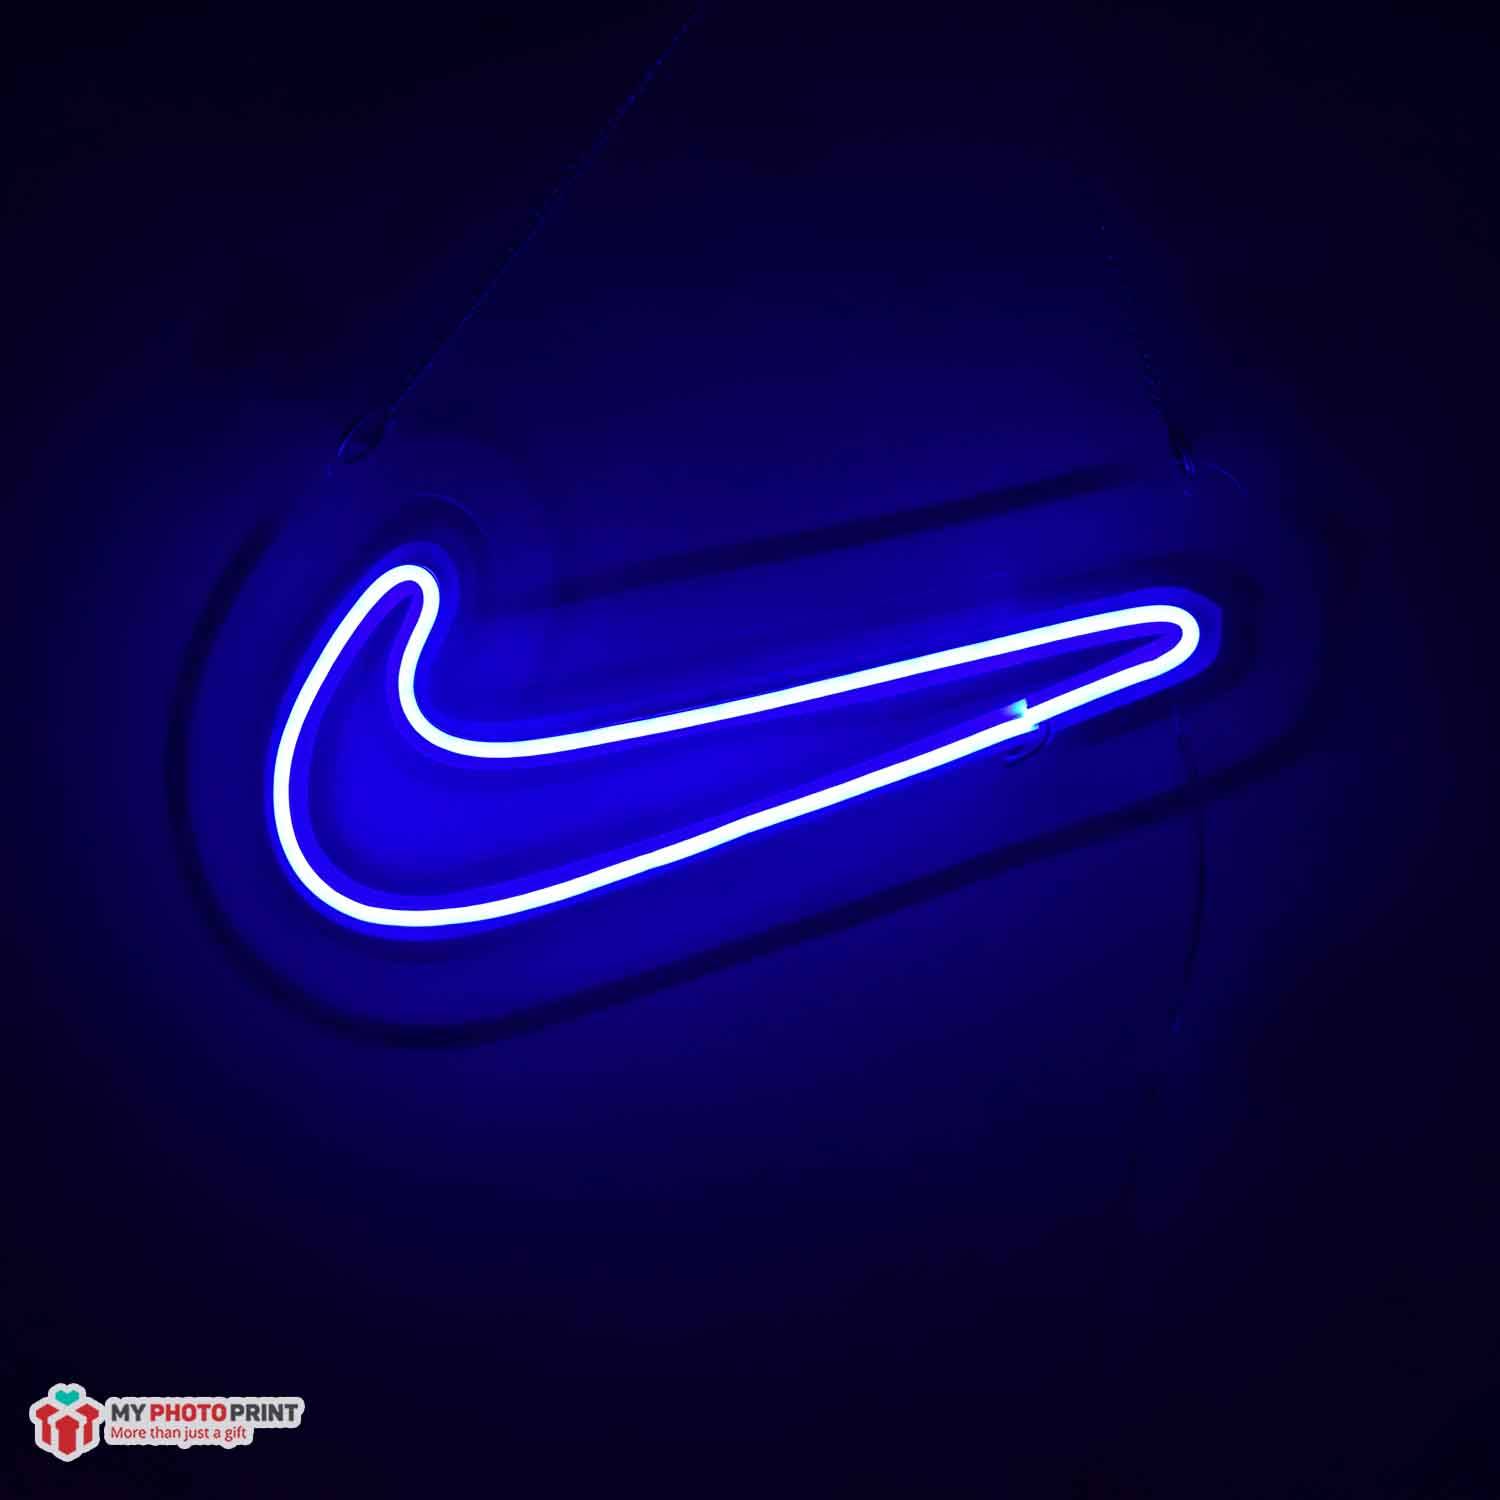 Neon Nike Led Neon Sign Decorative Lights Wall Decor| Size Approx 15 inch X 8 inch